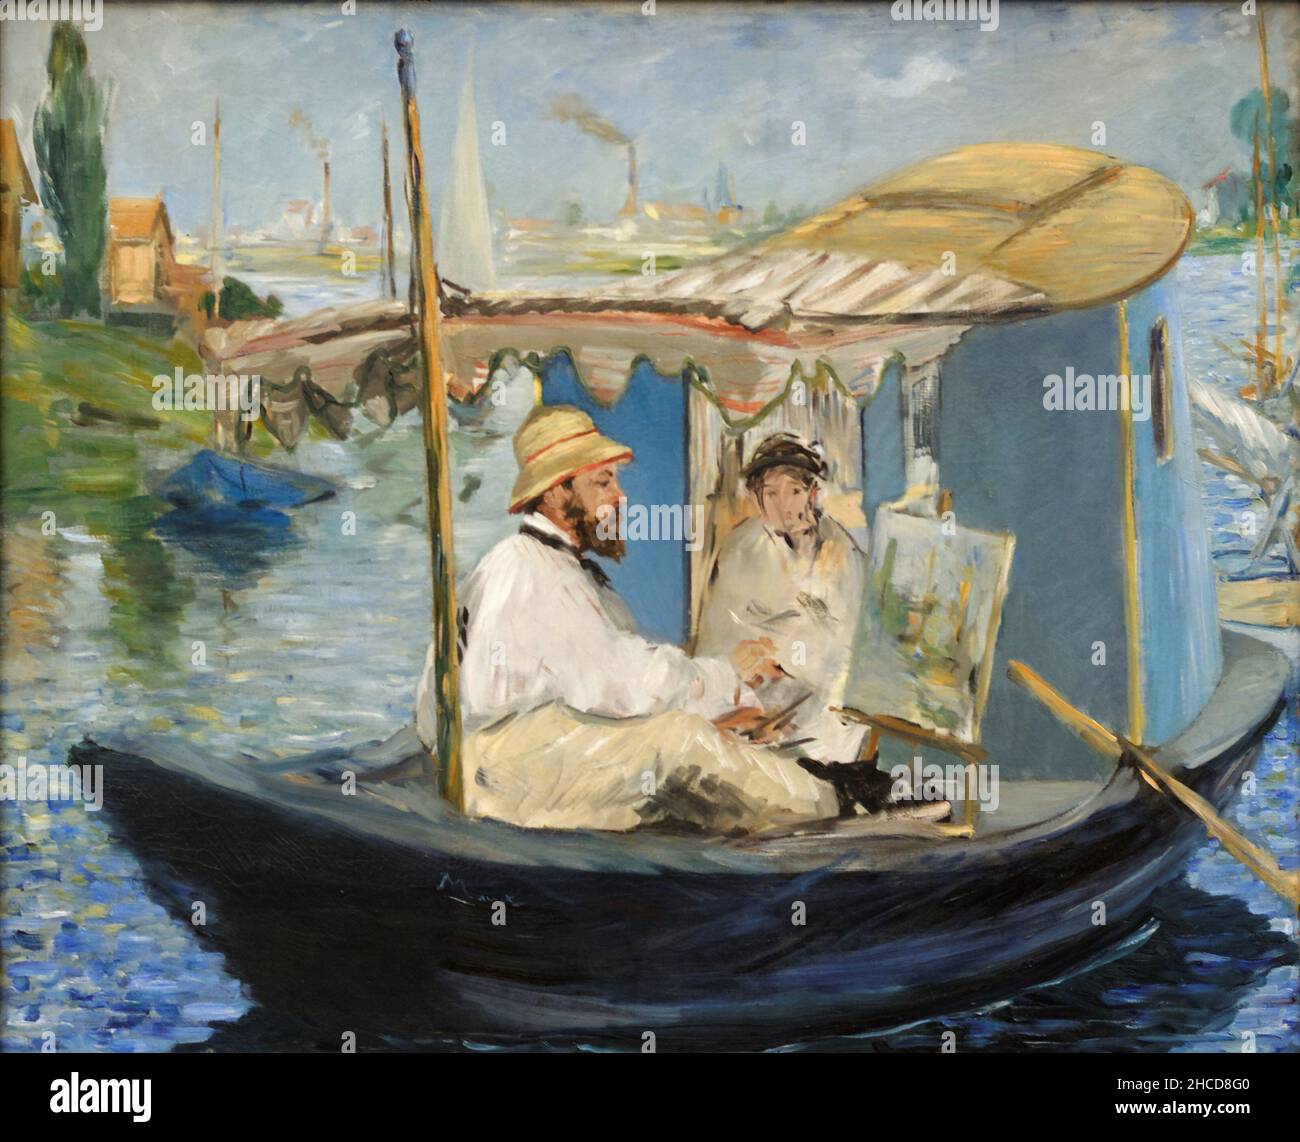 Monet in his Studio by Edouard Manet. It shows his friend Claude Monet painting in his 'studio-boat' with his wife. Stock Photo